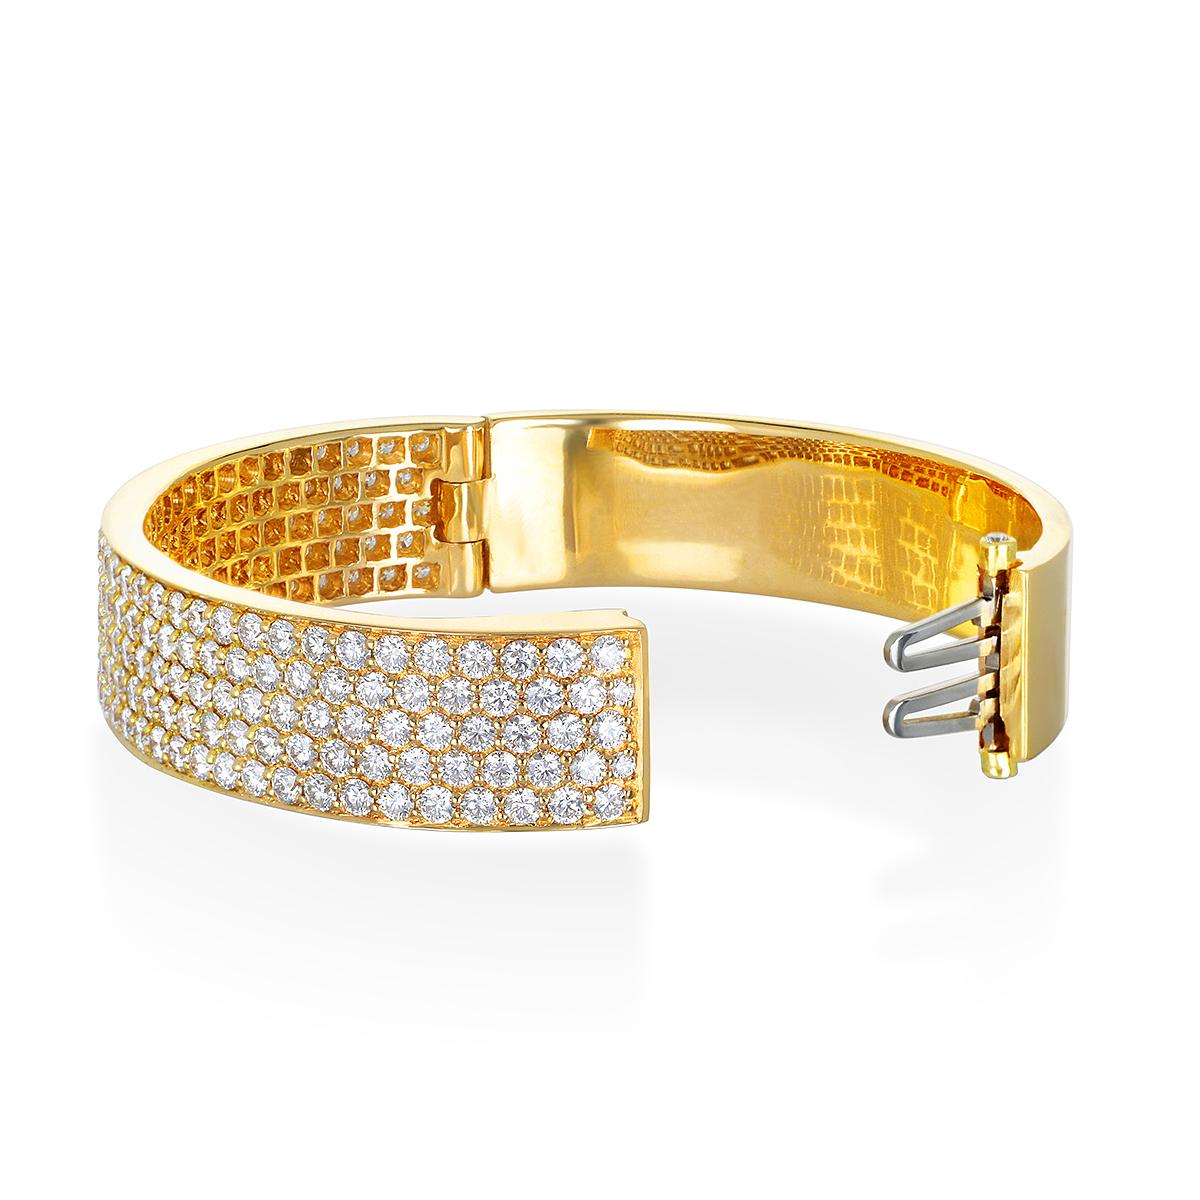 Handcrafted in 18 karat yellow gold, this fitted Pave Diamond Hinged Bracelet, with its modern design and brilliant array of diamonds, makes it the perfect statement piece. A showstopper, this one-of-a-kind bracelet can be worn for every occasion.